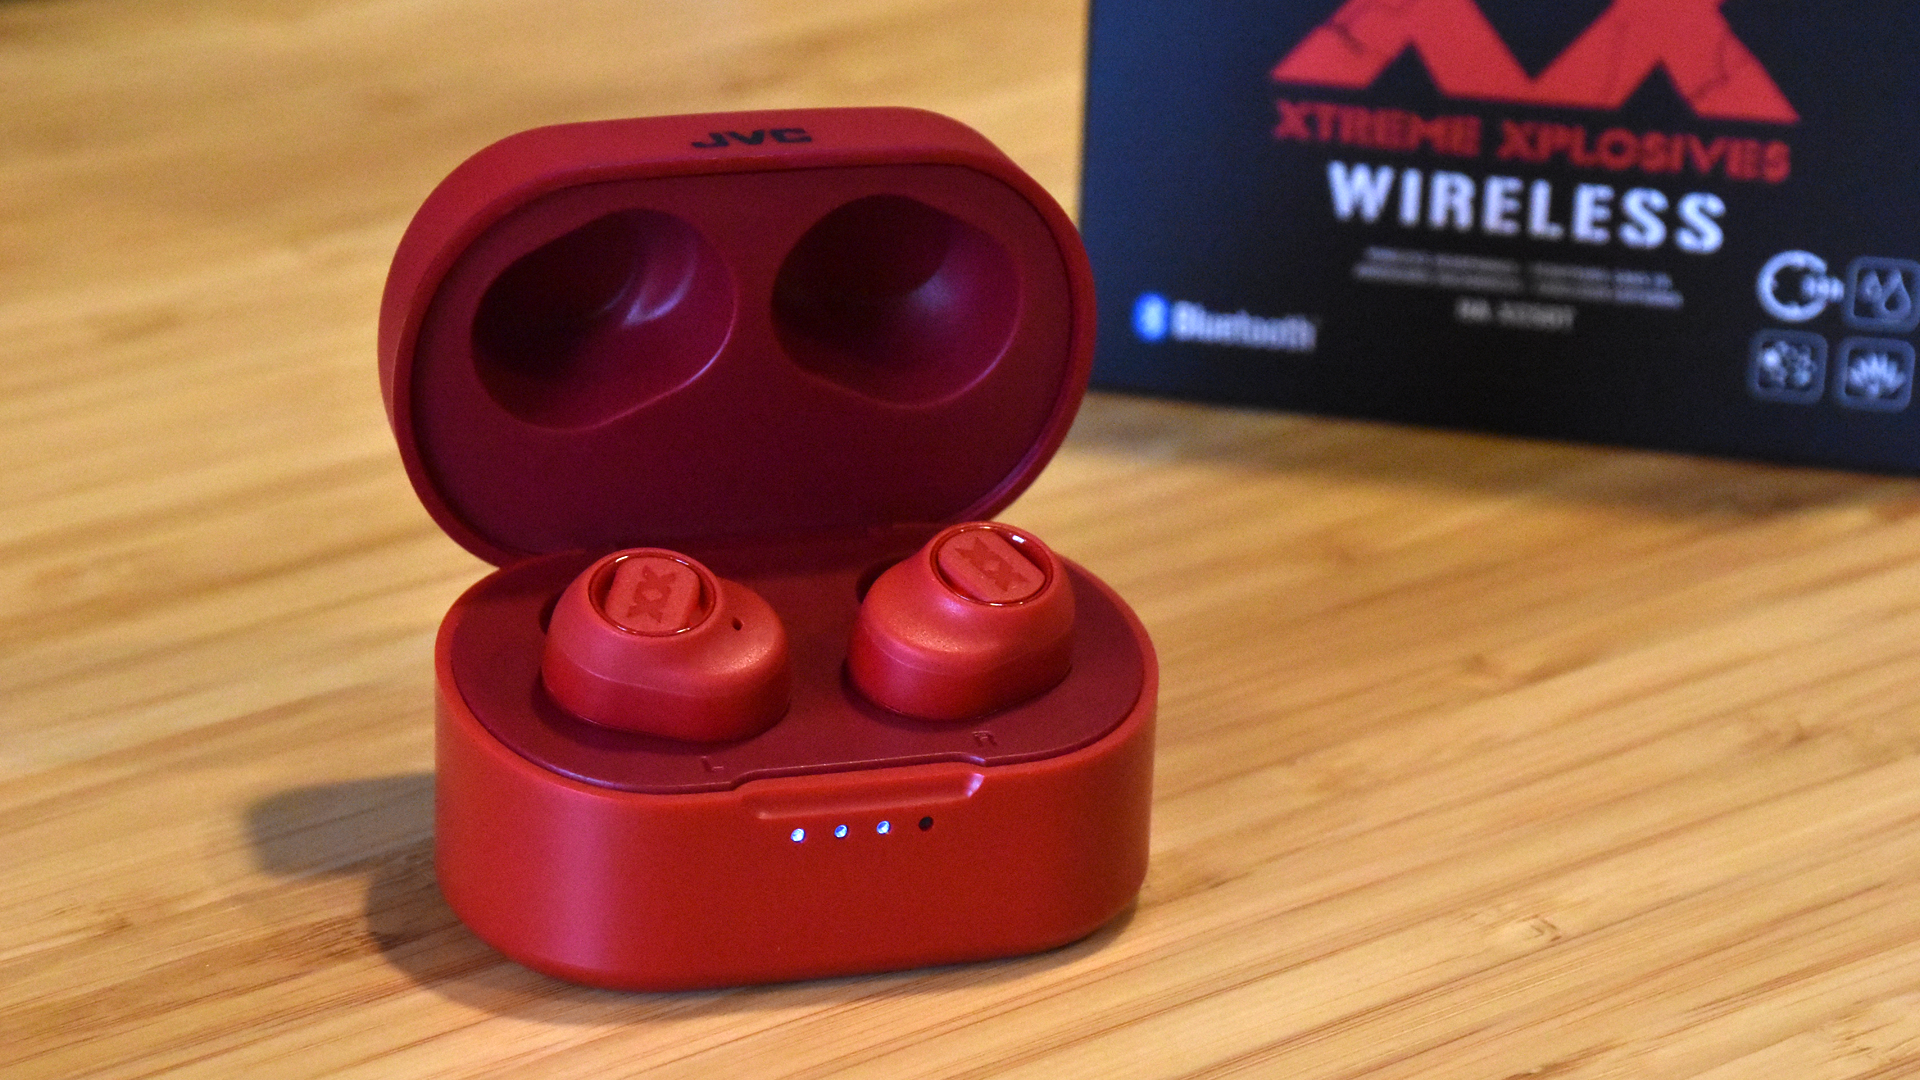 Shot of the HA-XC50Ts charging in the case with the lid open, with the packaging behind it